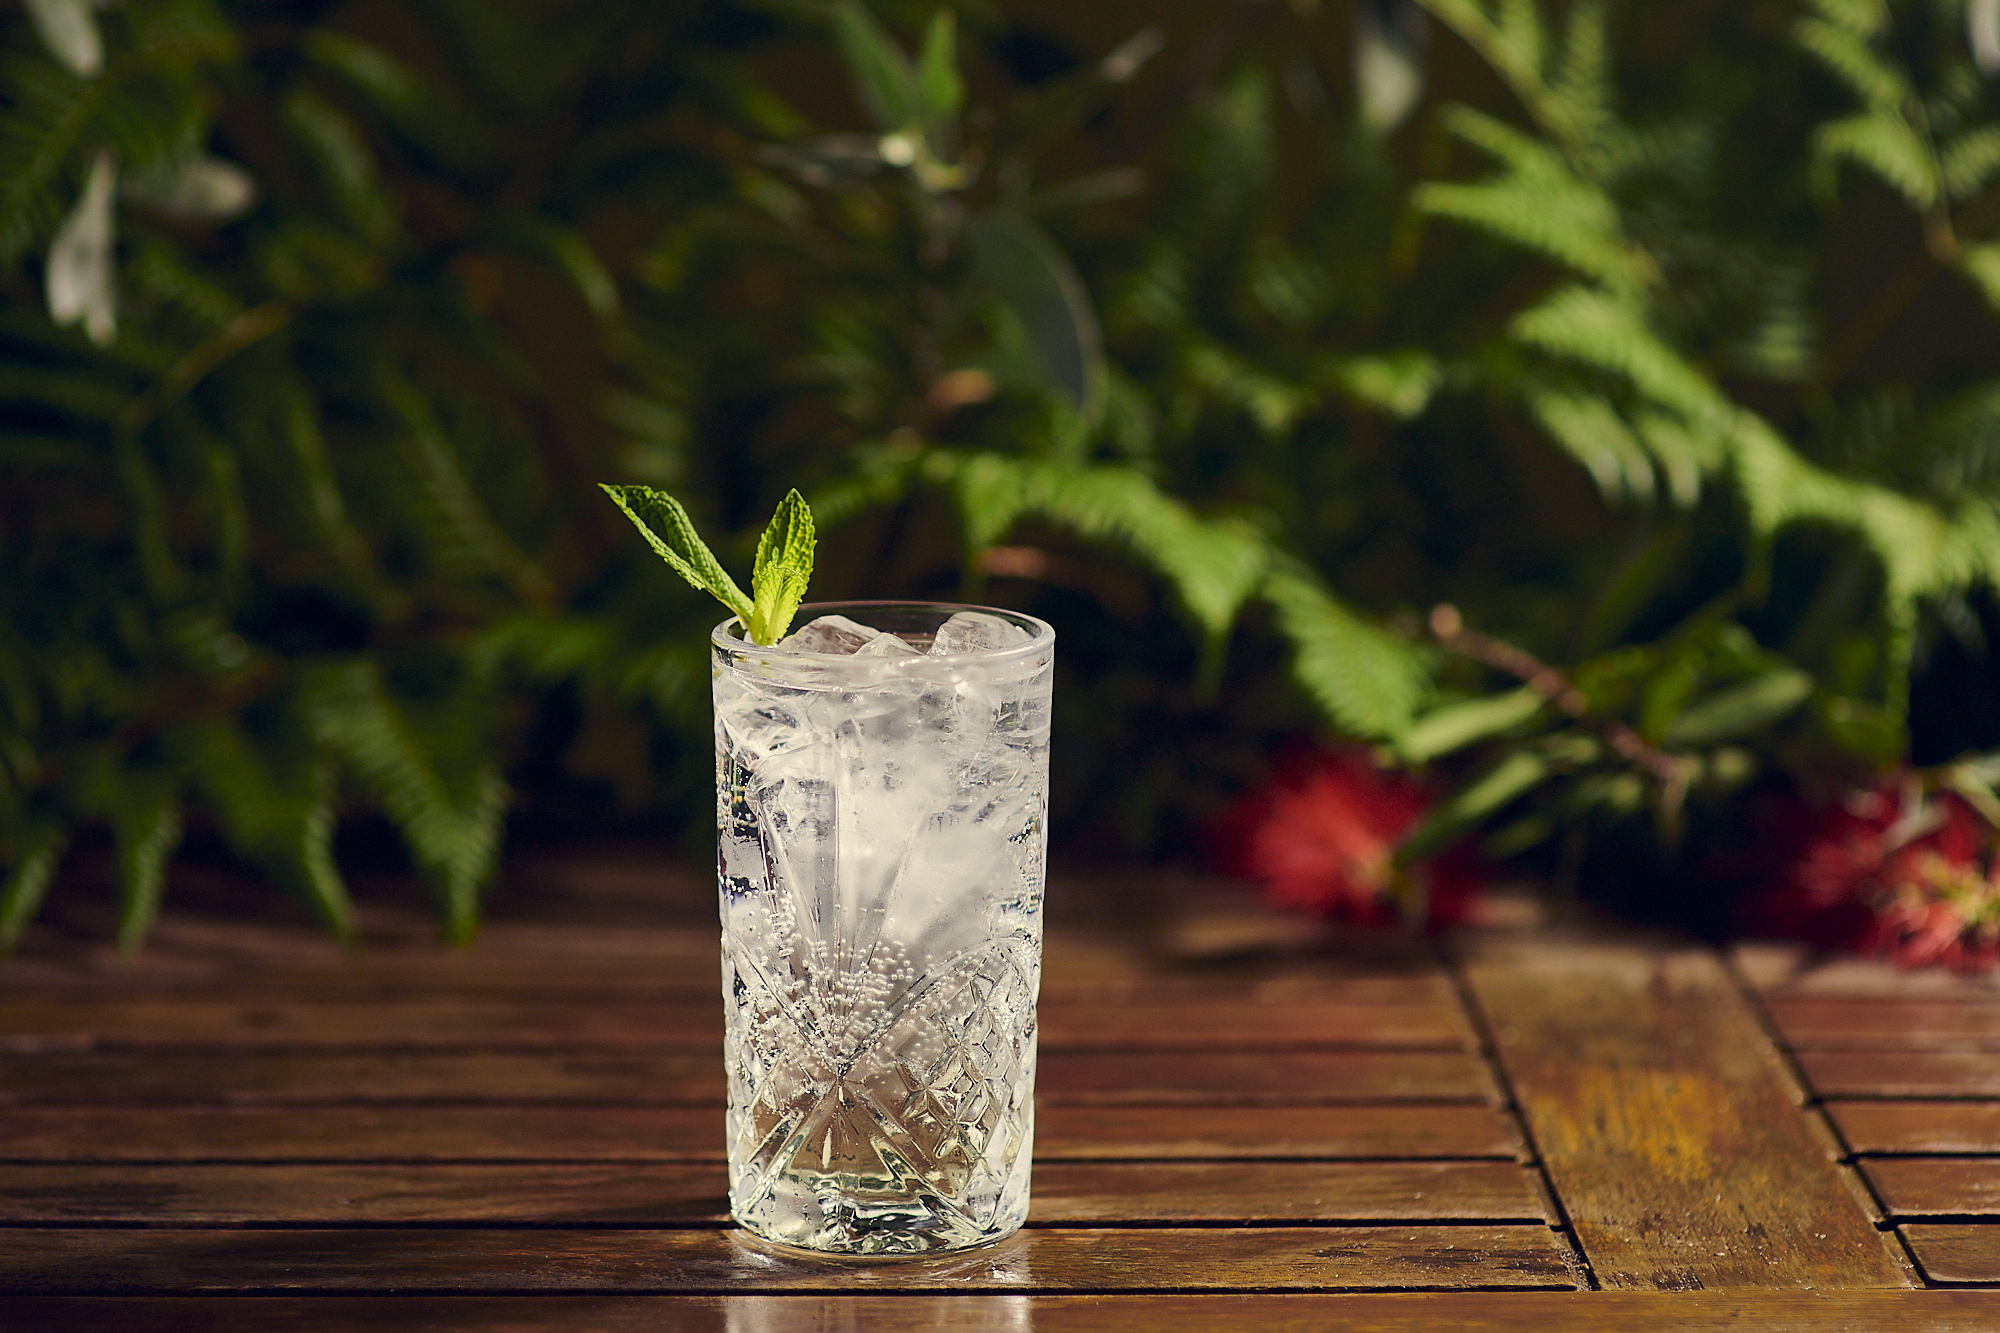 The Botanist gin cocktail recipe